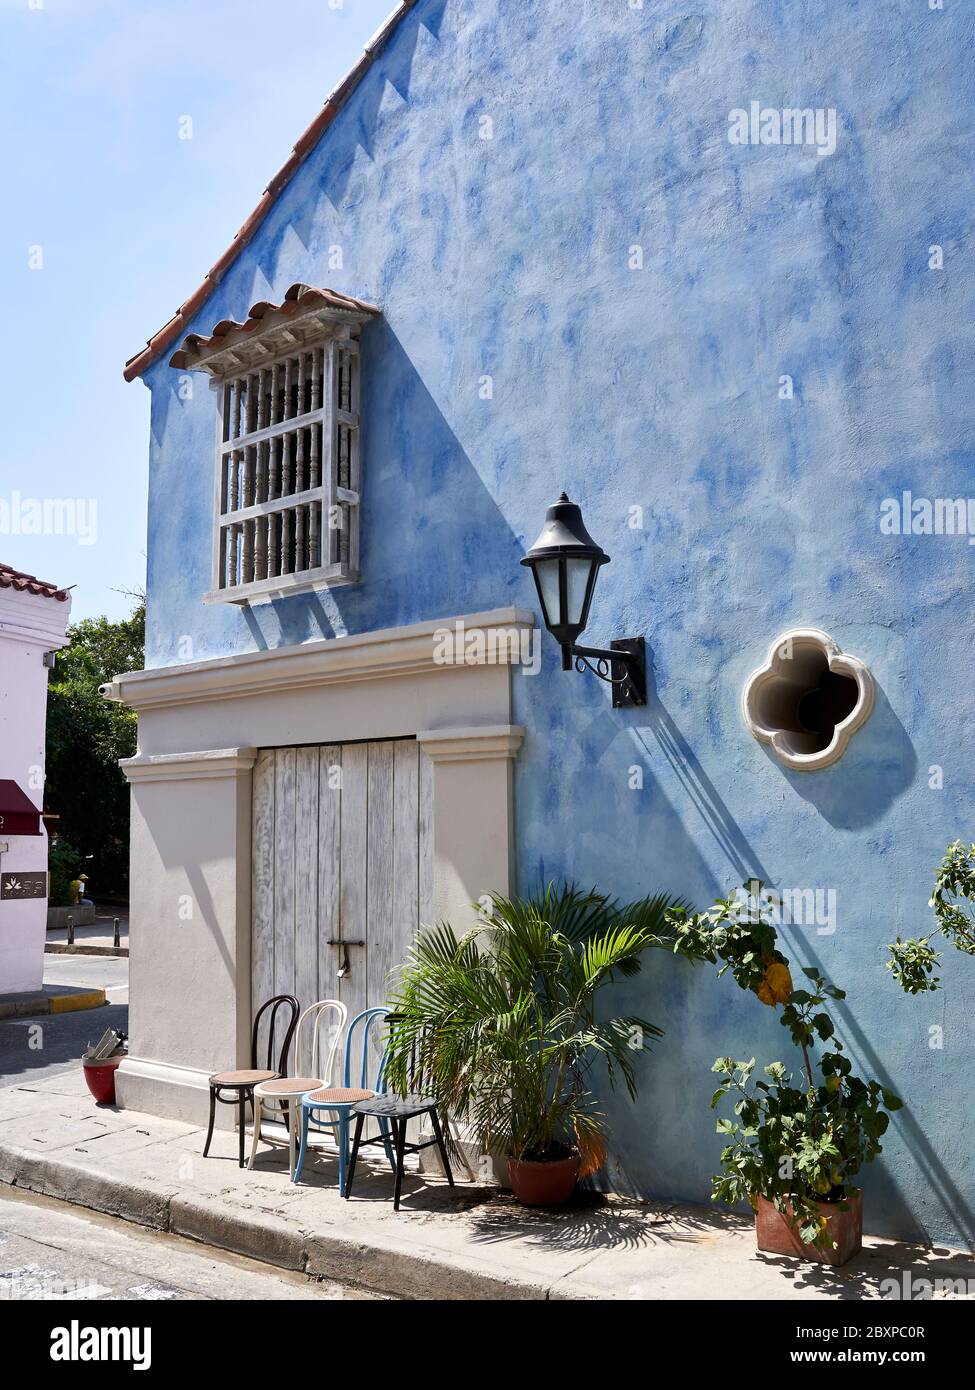 House on street corner in old town Cartagena, Colombia. Stock Photo